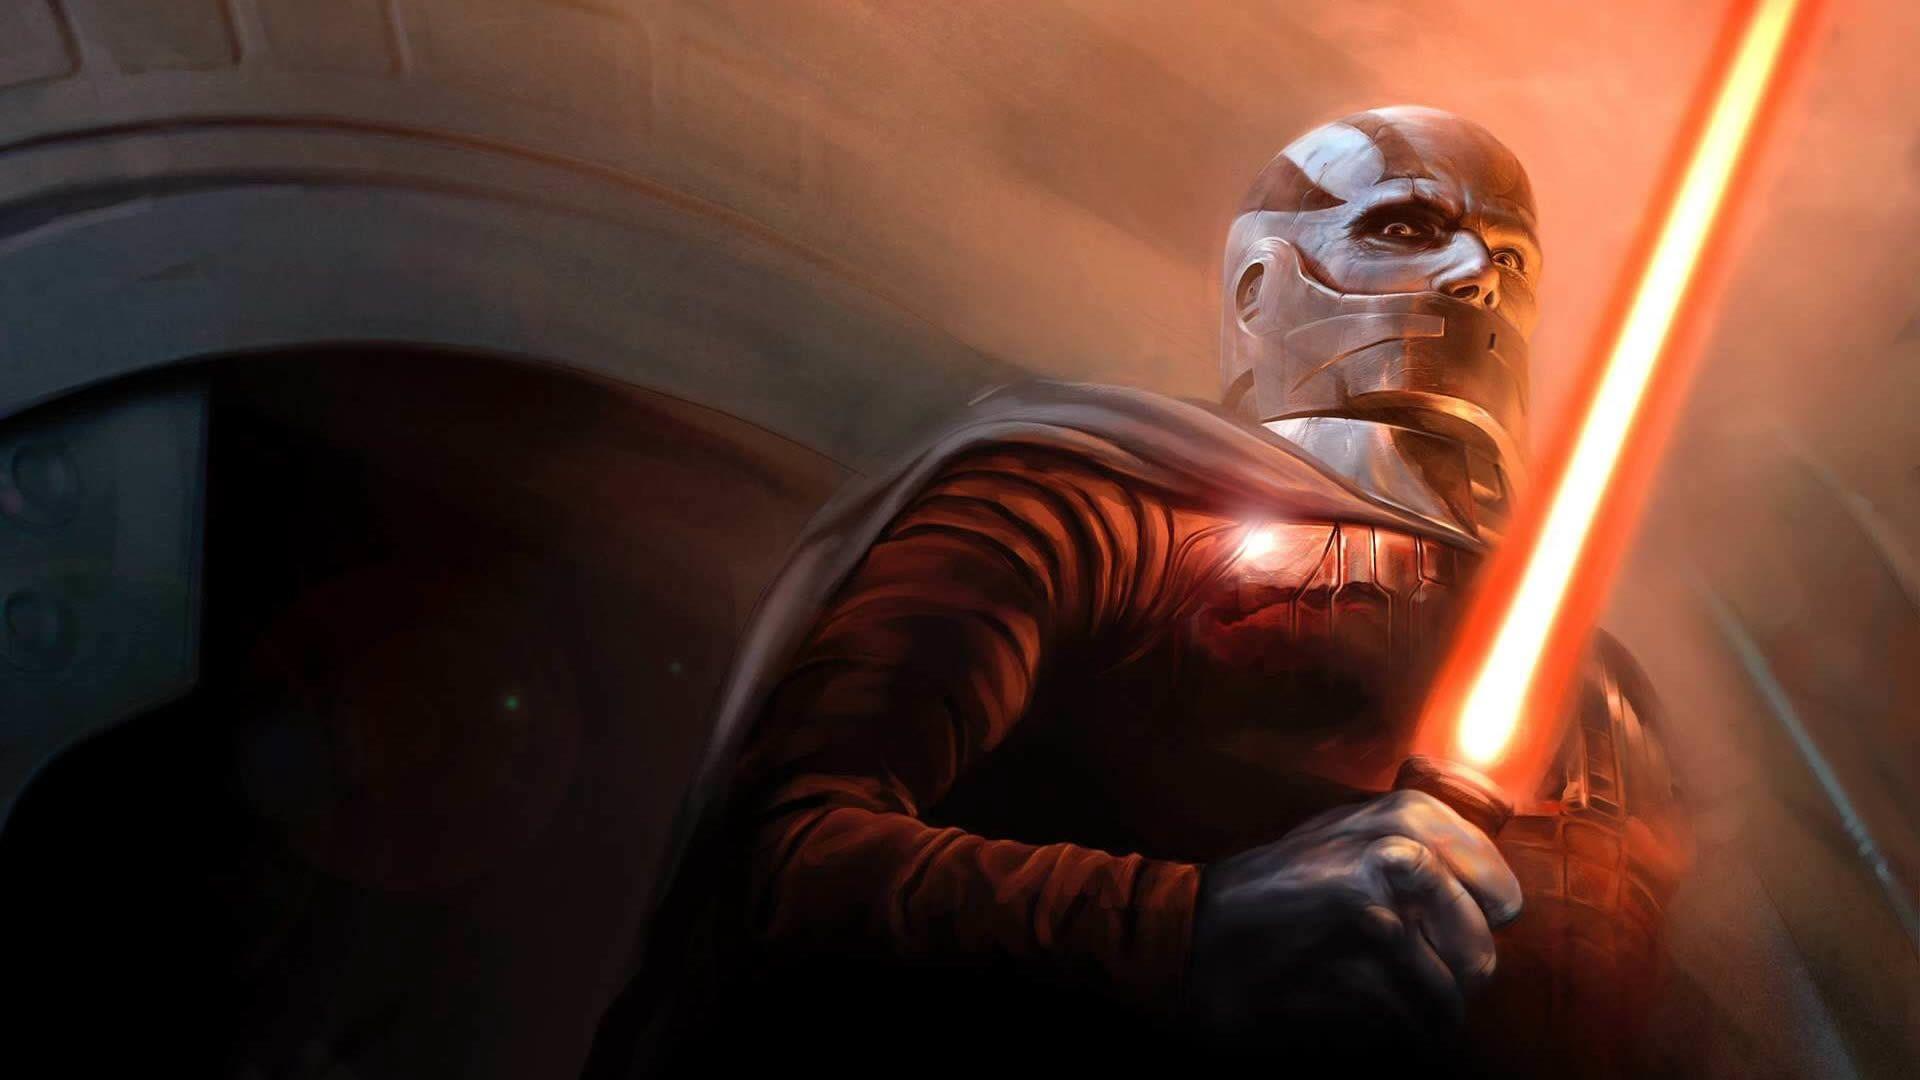 Download Wallpaper 1920x1080 Star wars the old republic, Bald